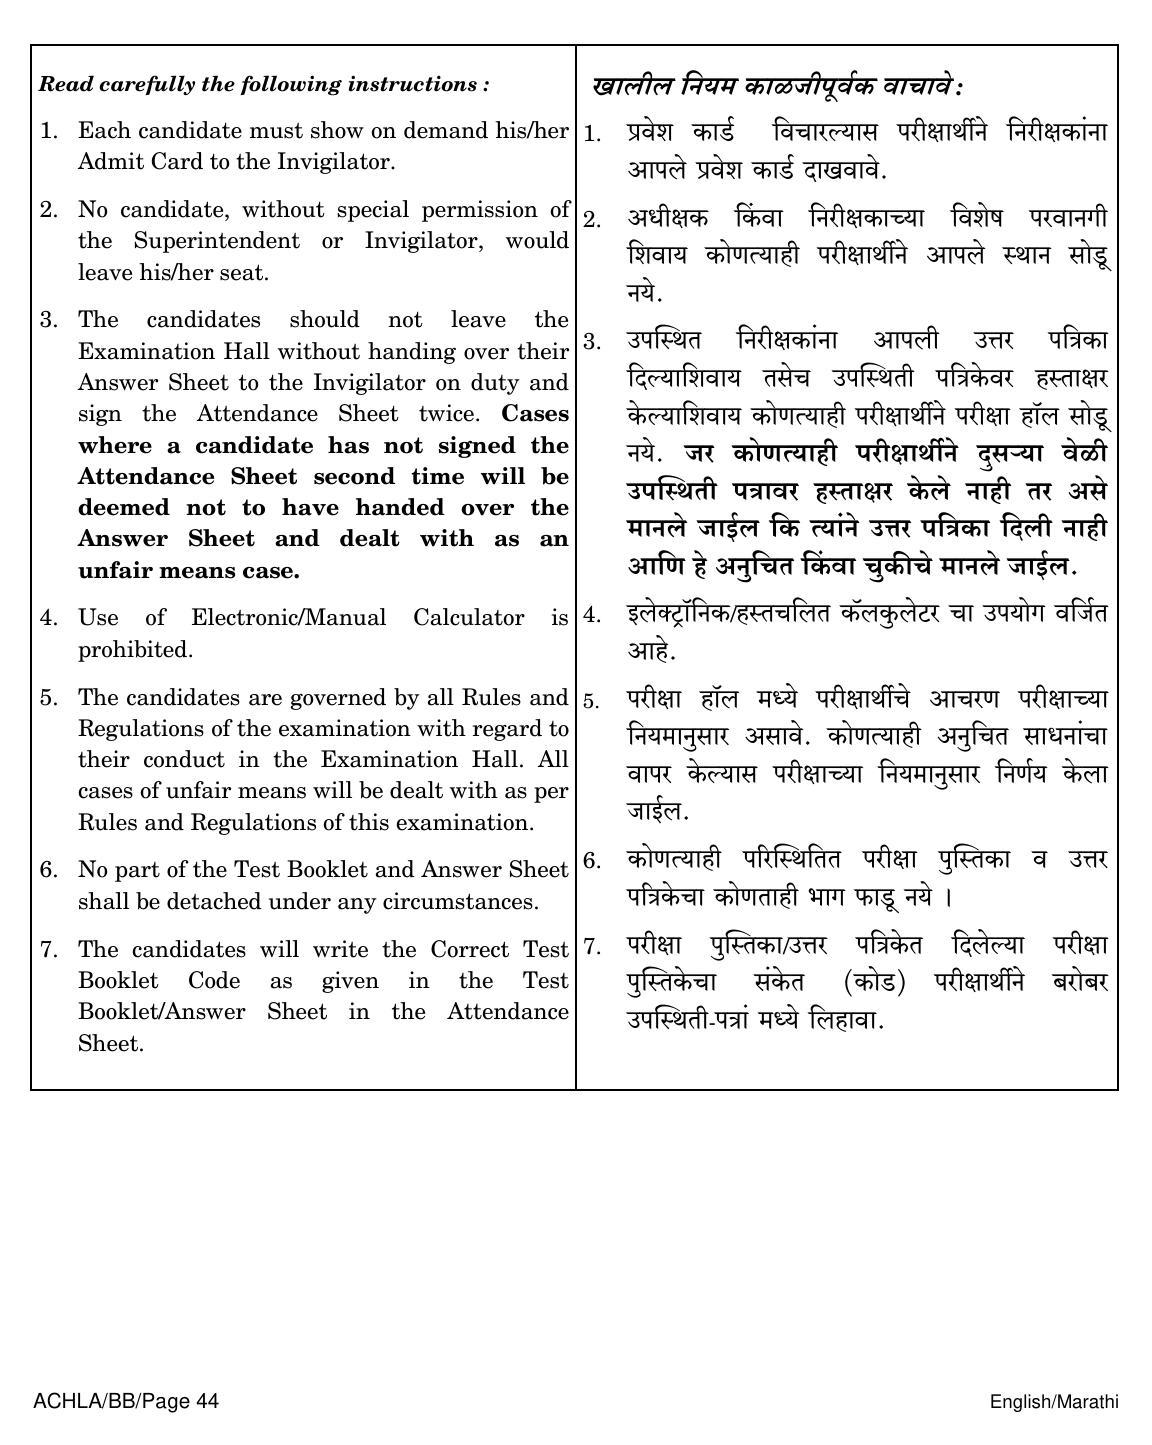 NEET Marathi BB 2018 Question Paper - Page 44